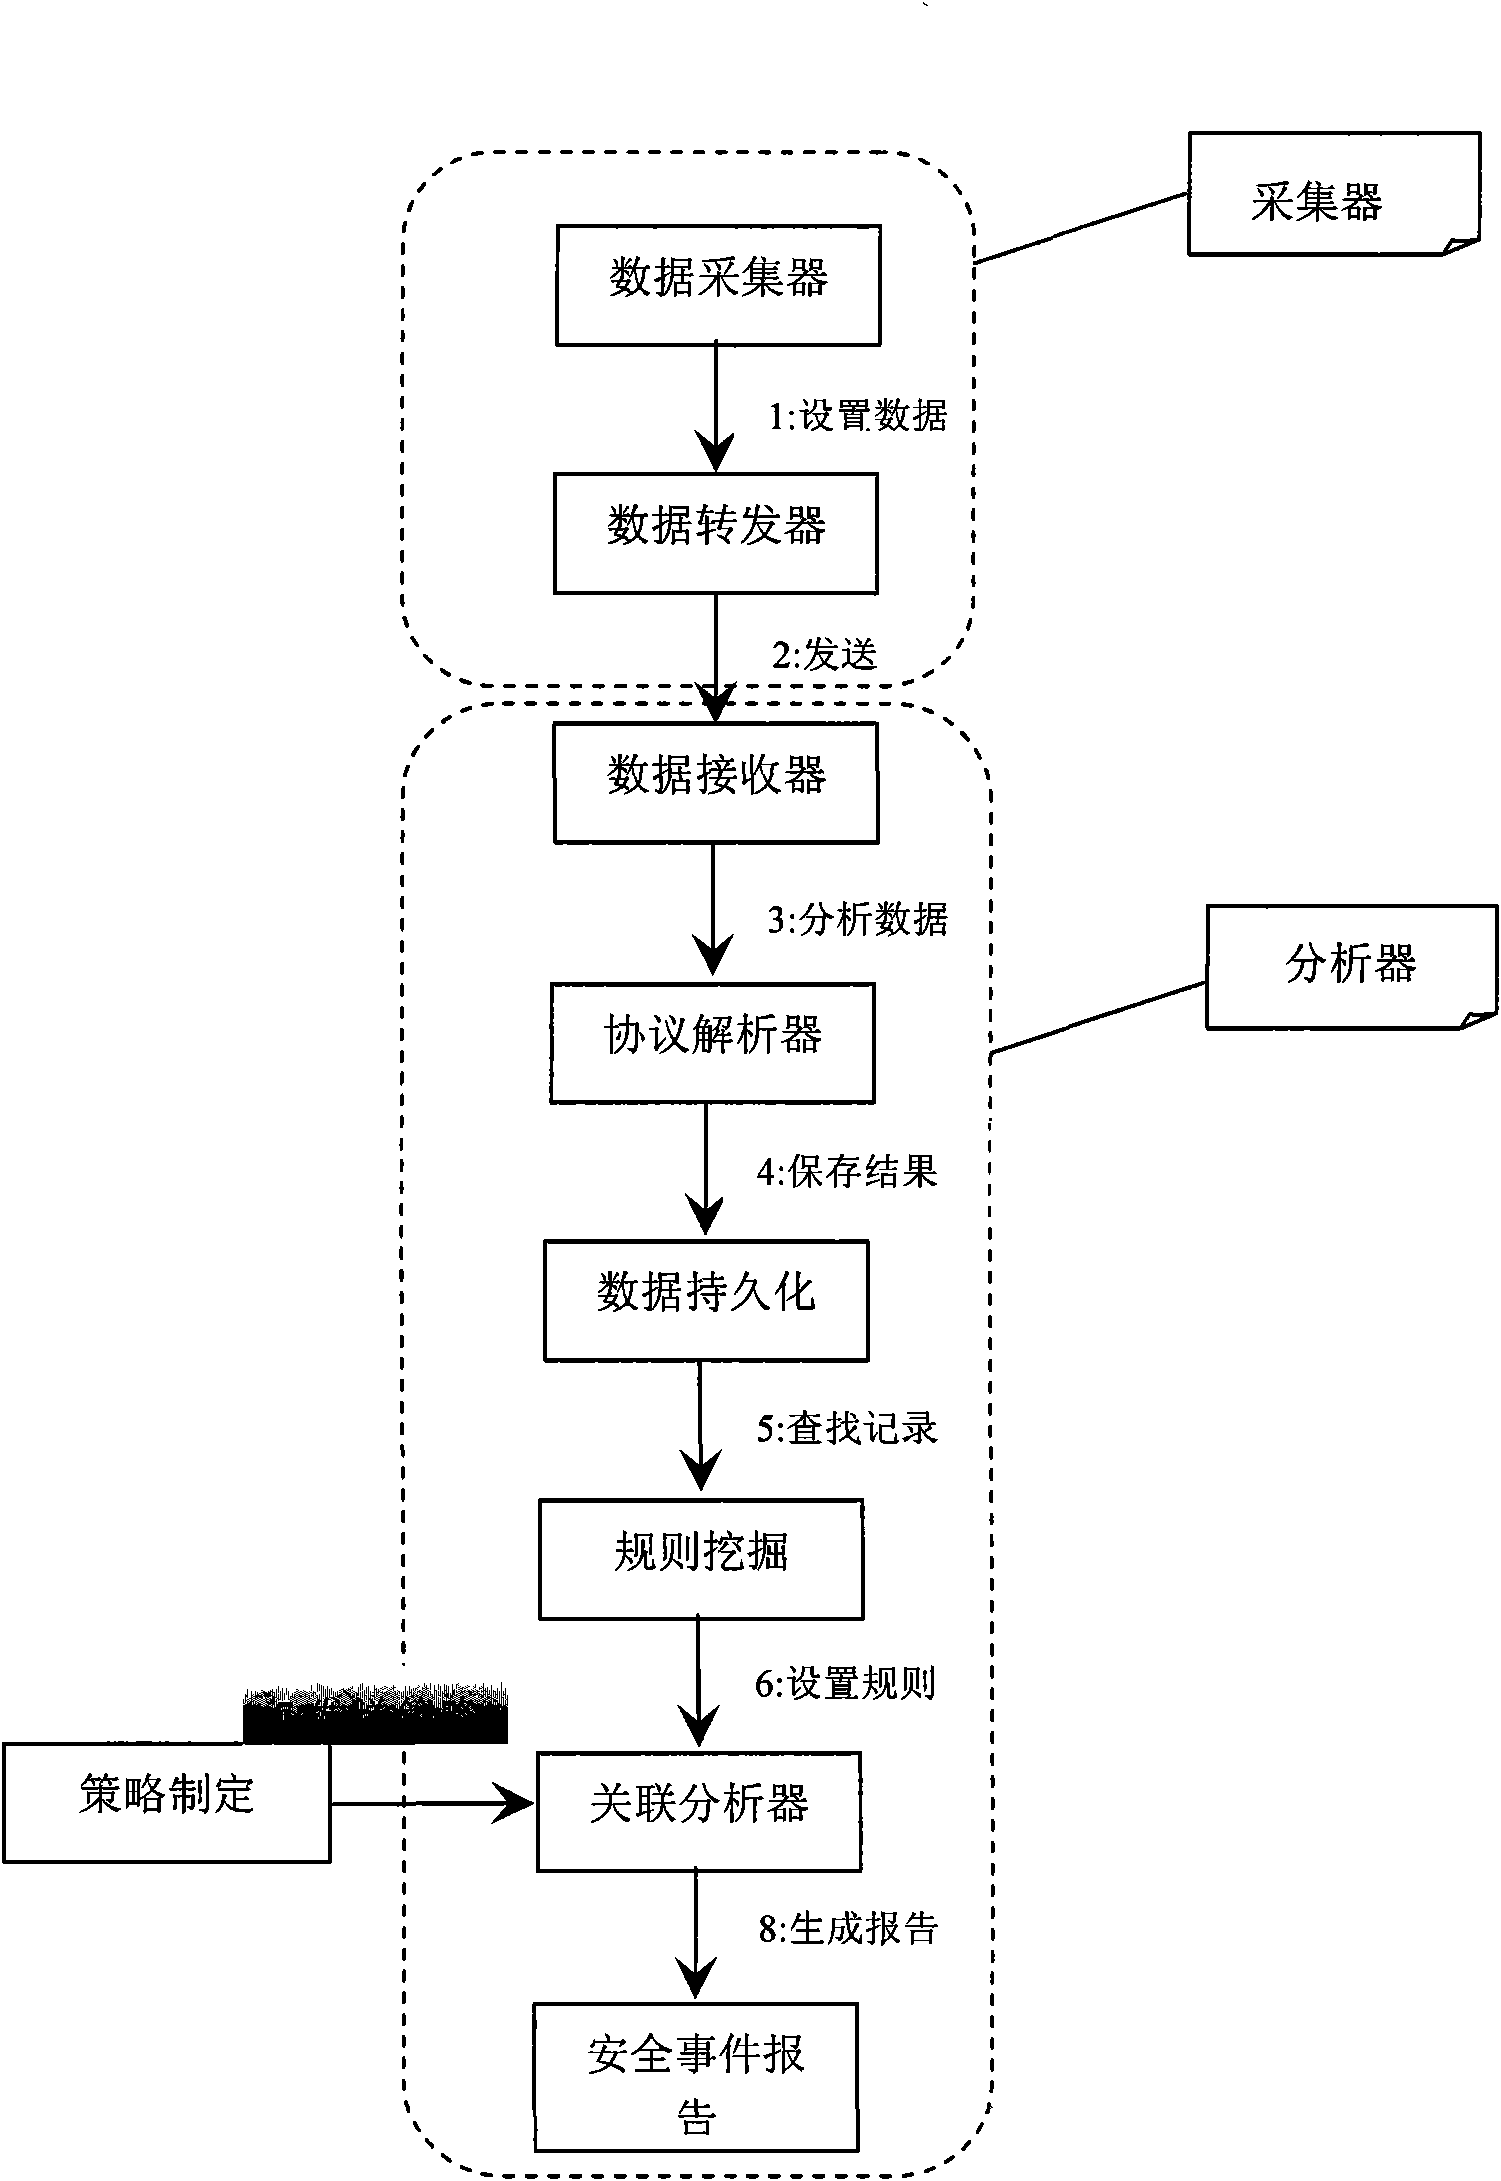 Method and device for detecting Trojans by analyzing network behaviors